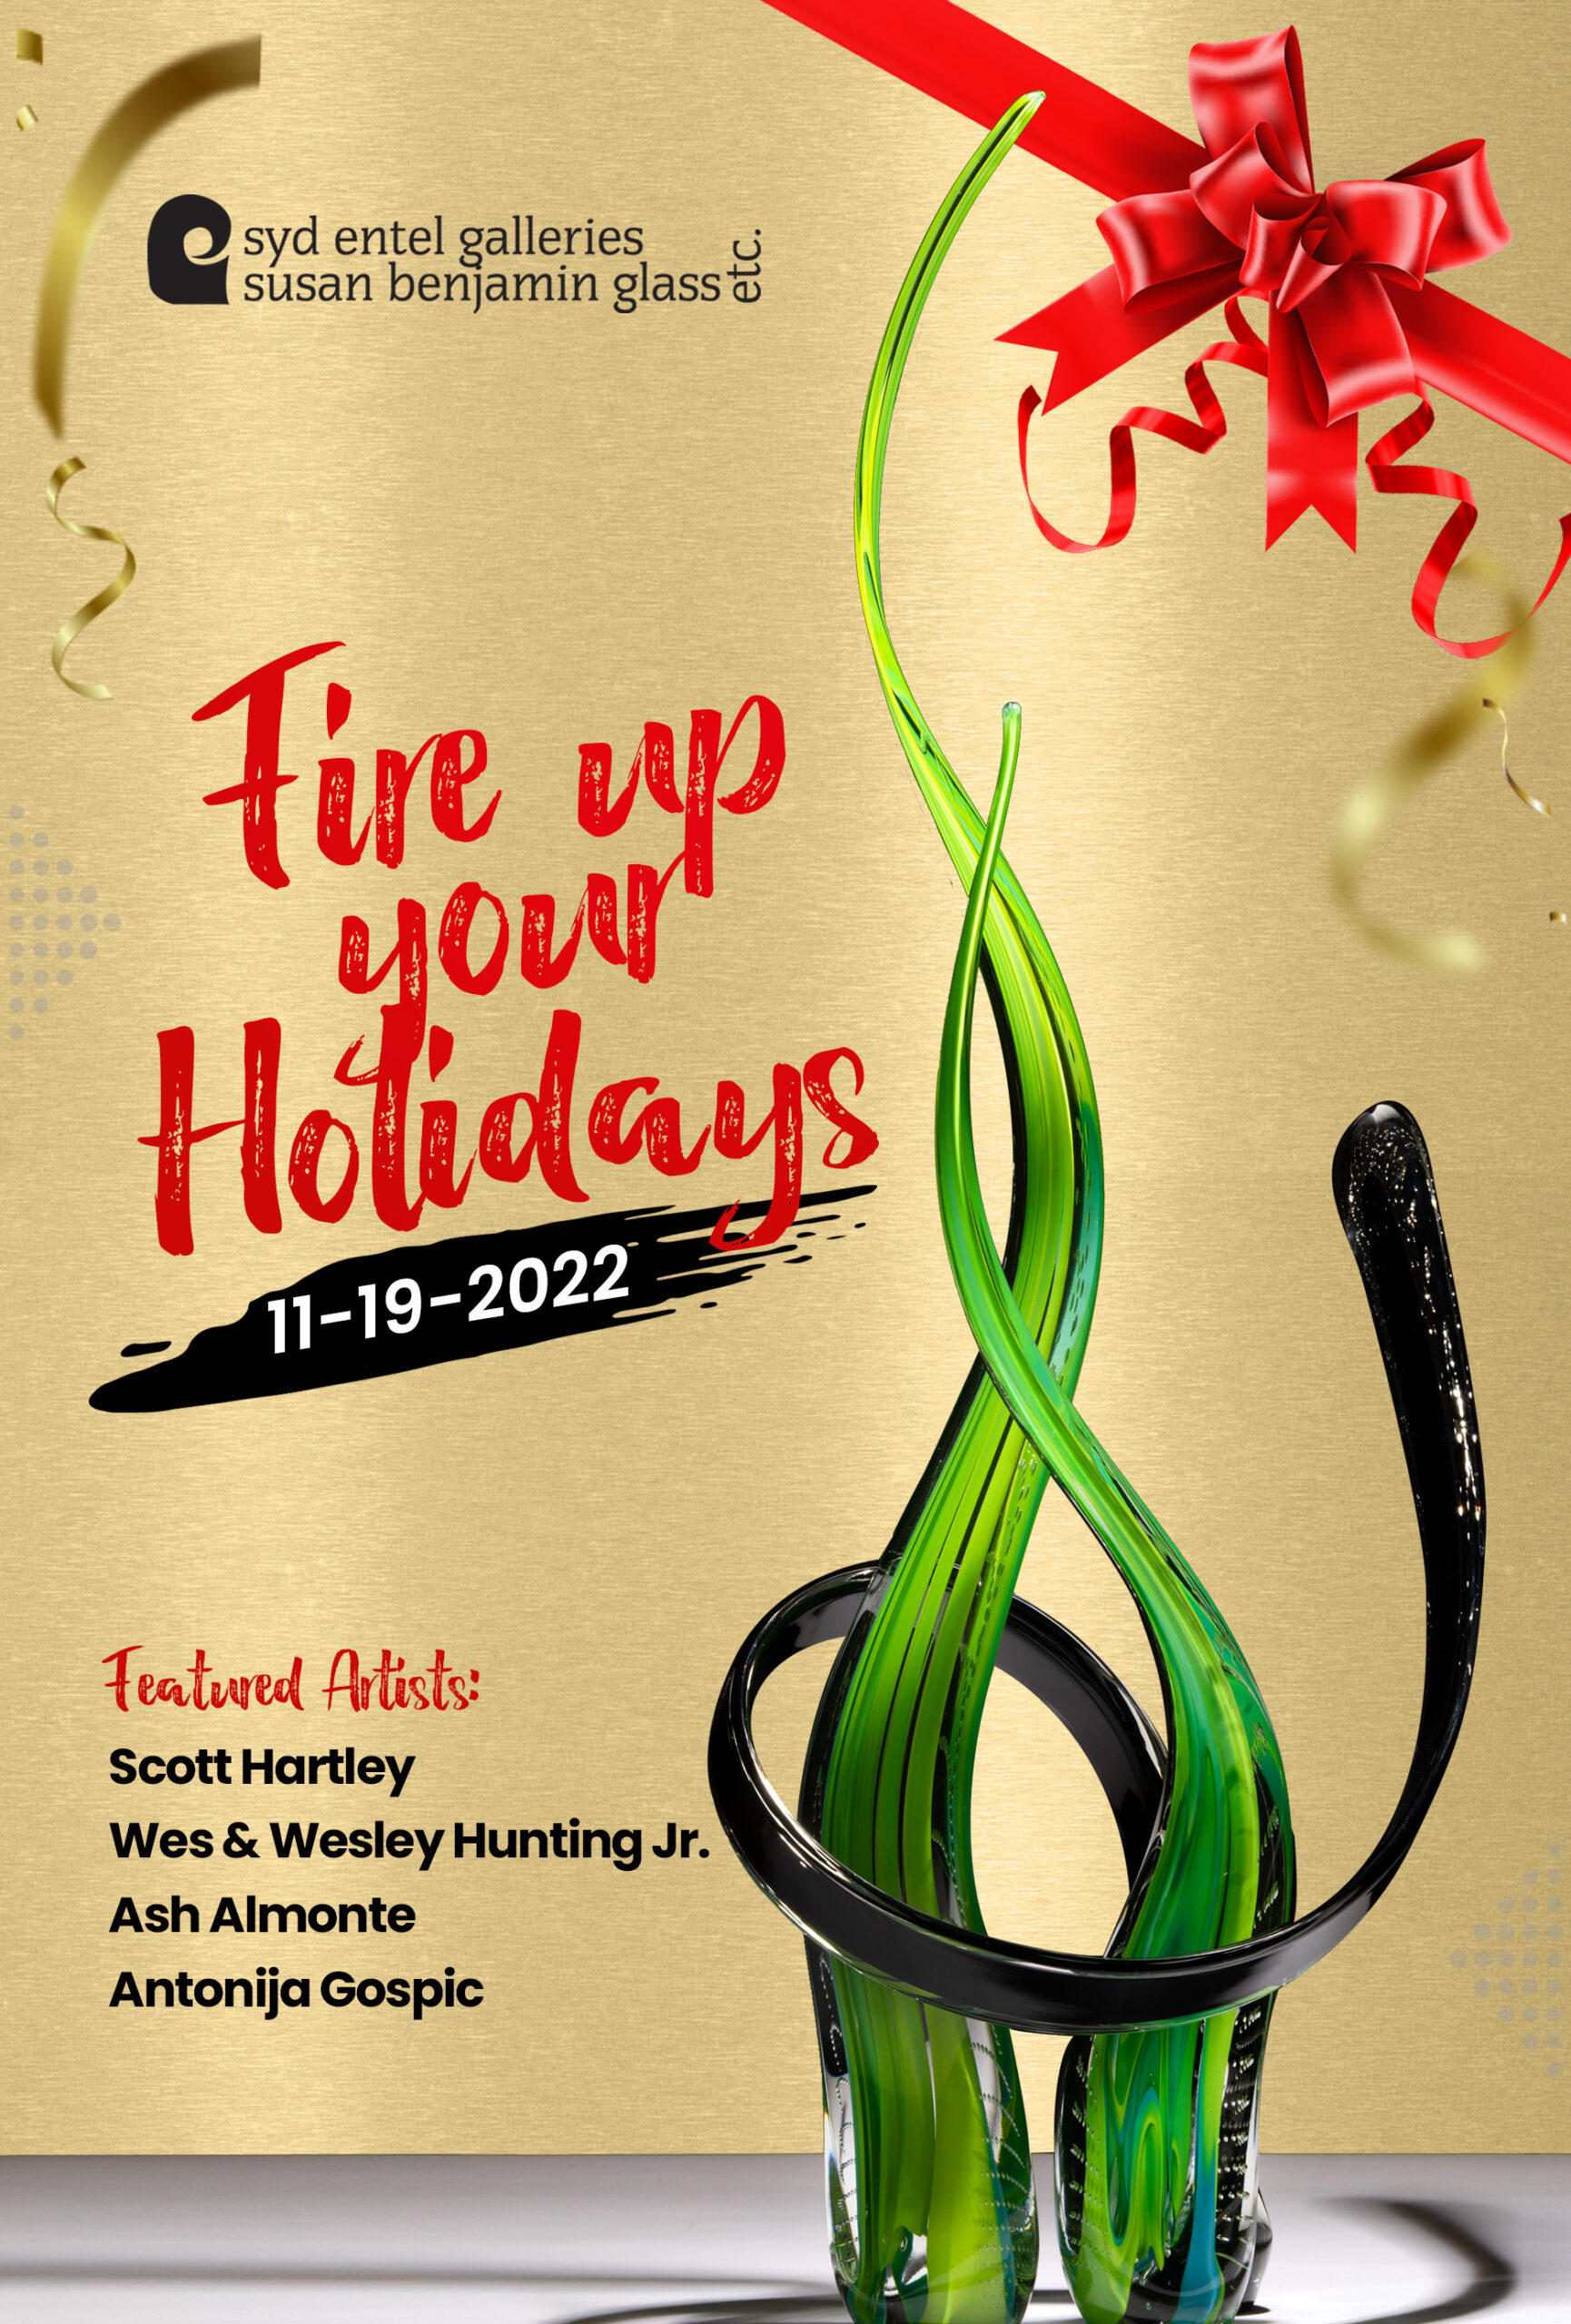 Holiday Art Show Fire up your holidays at syd entel galleries